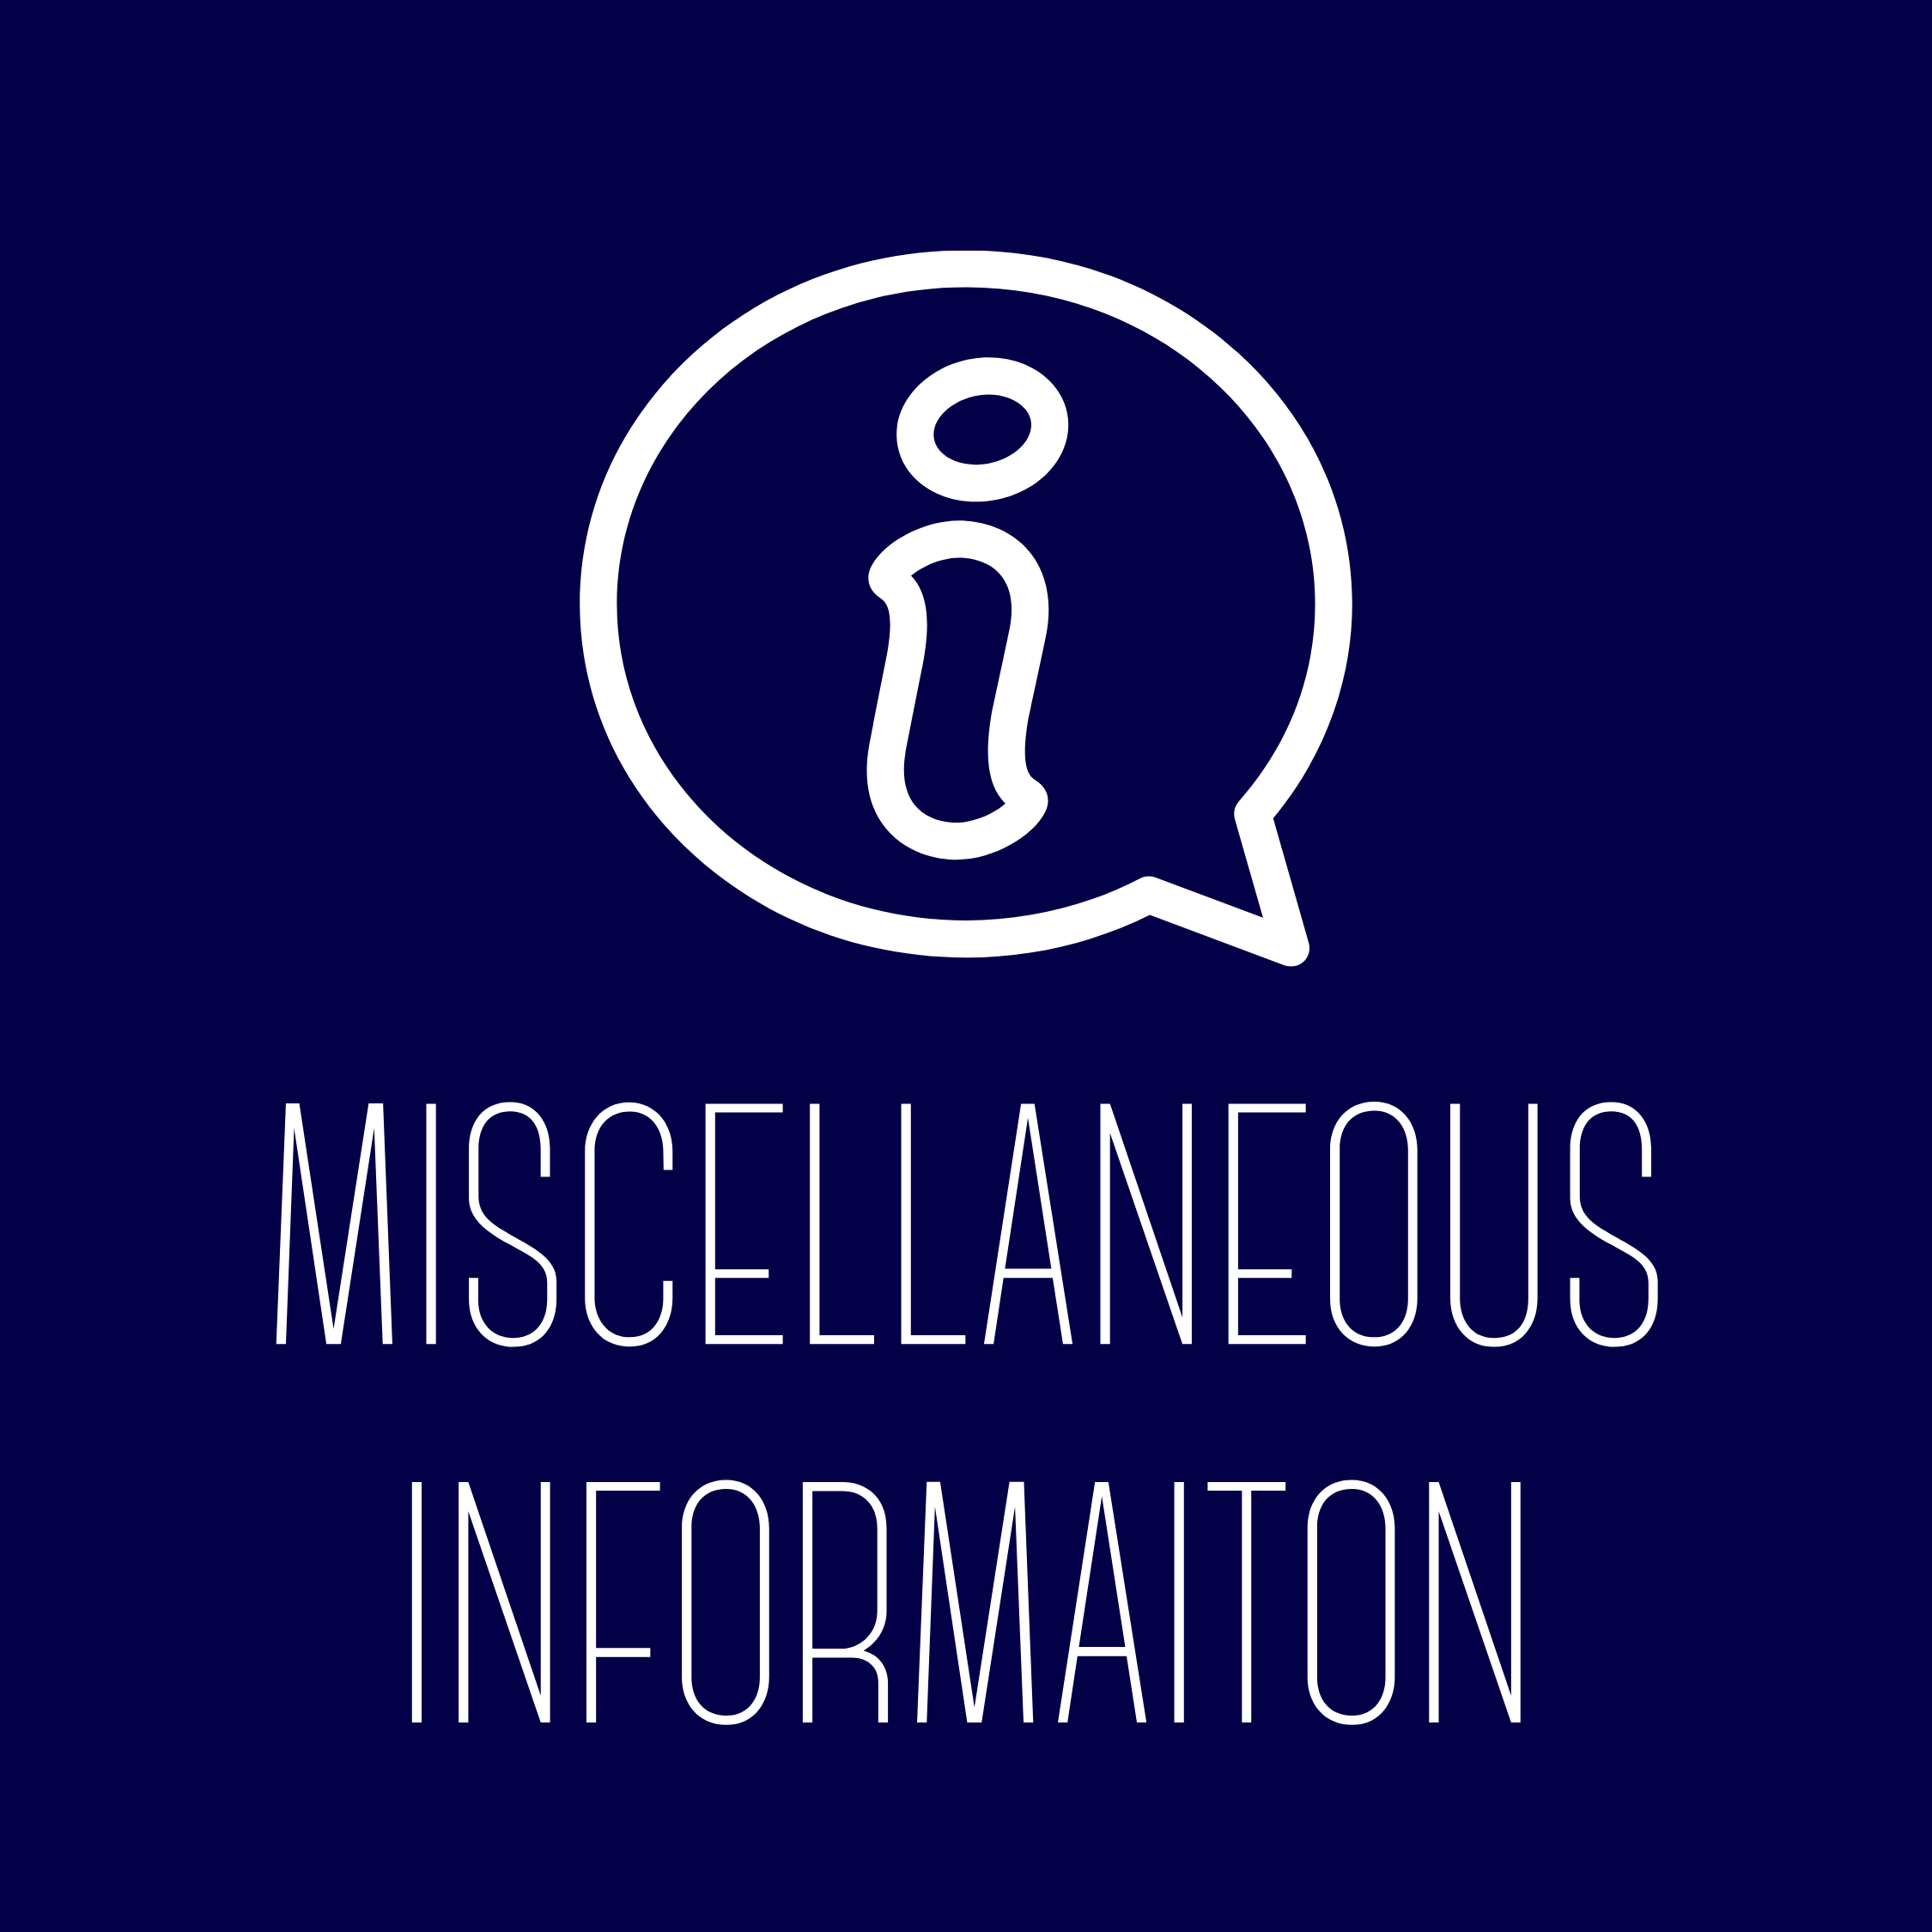 Miscellaneous Information